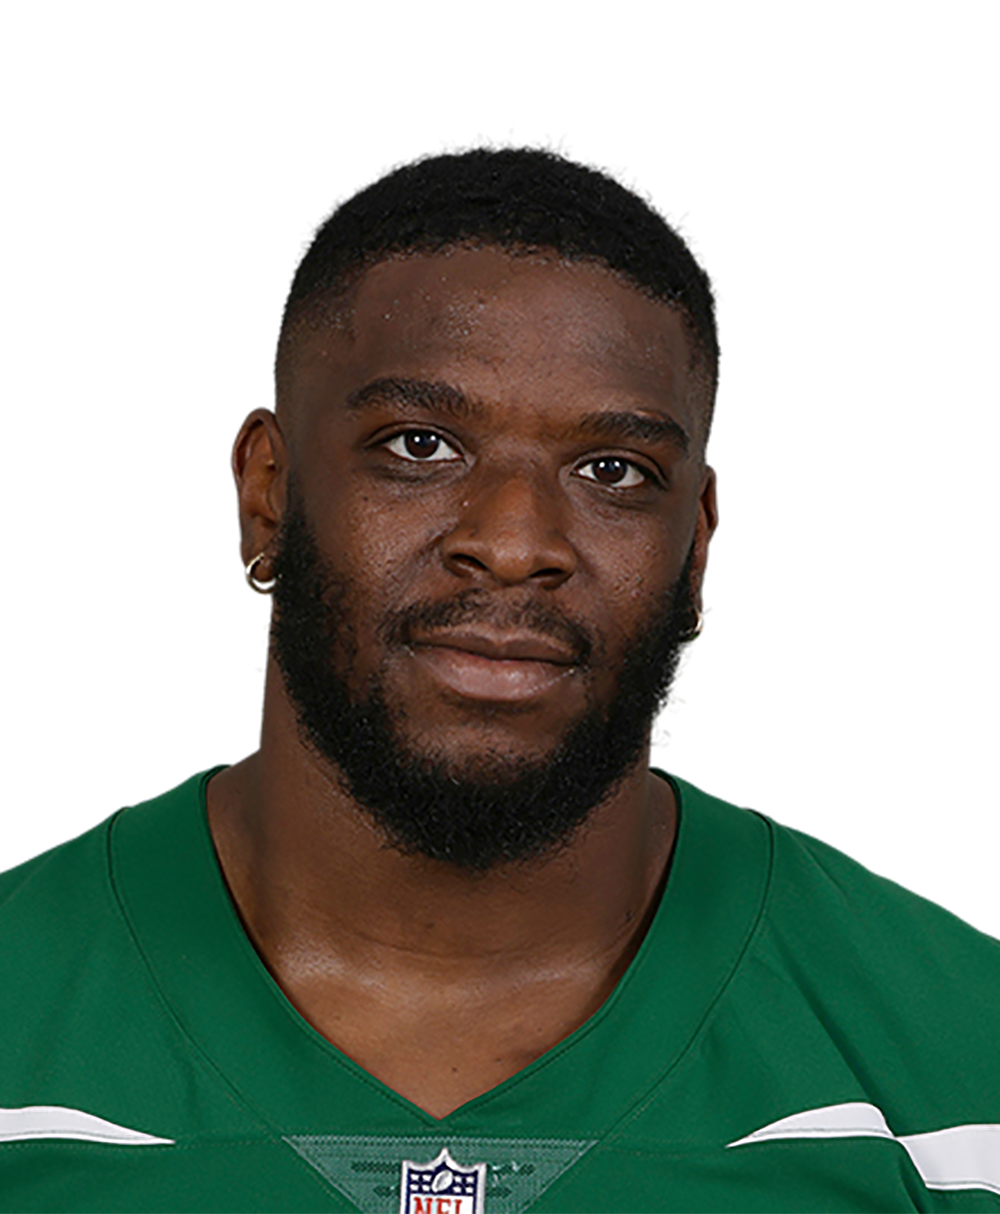 New York Jets DE Micheal Clemons Will Be Elite Pass Rusher in NFL